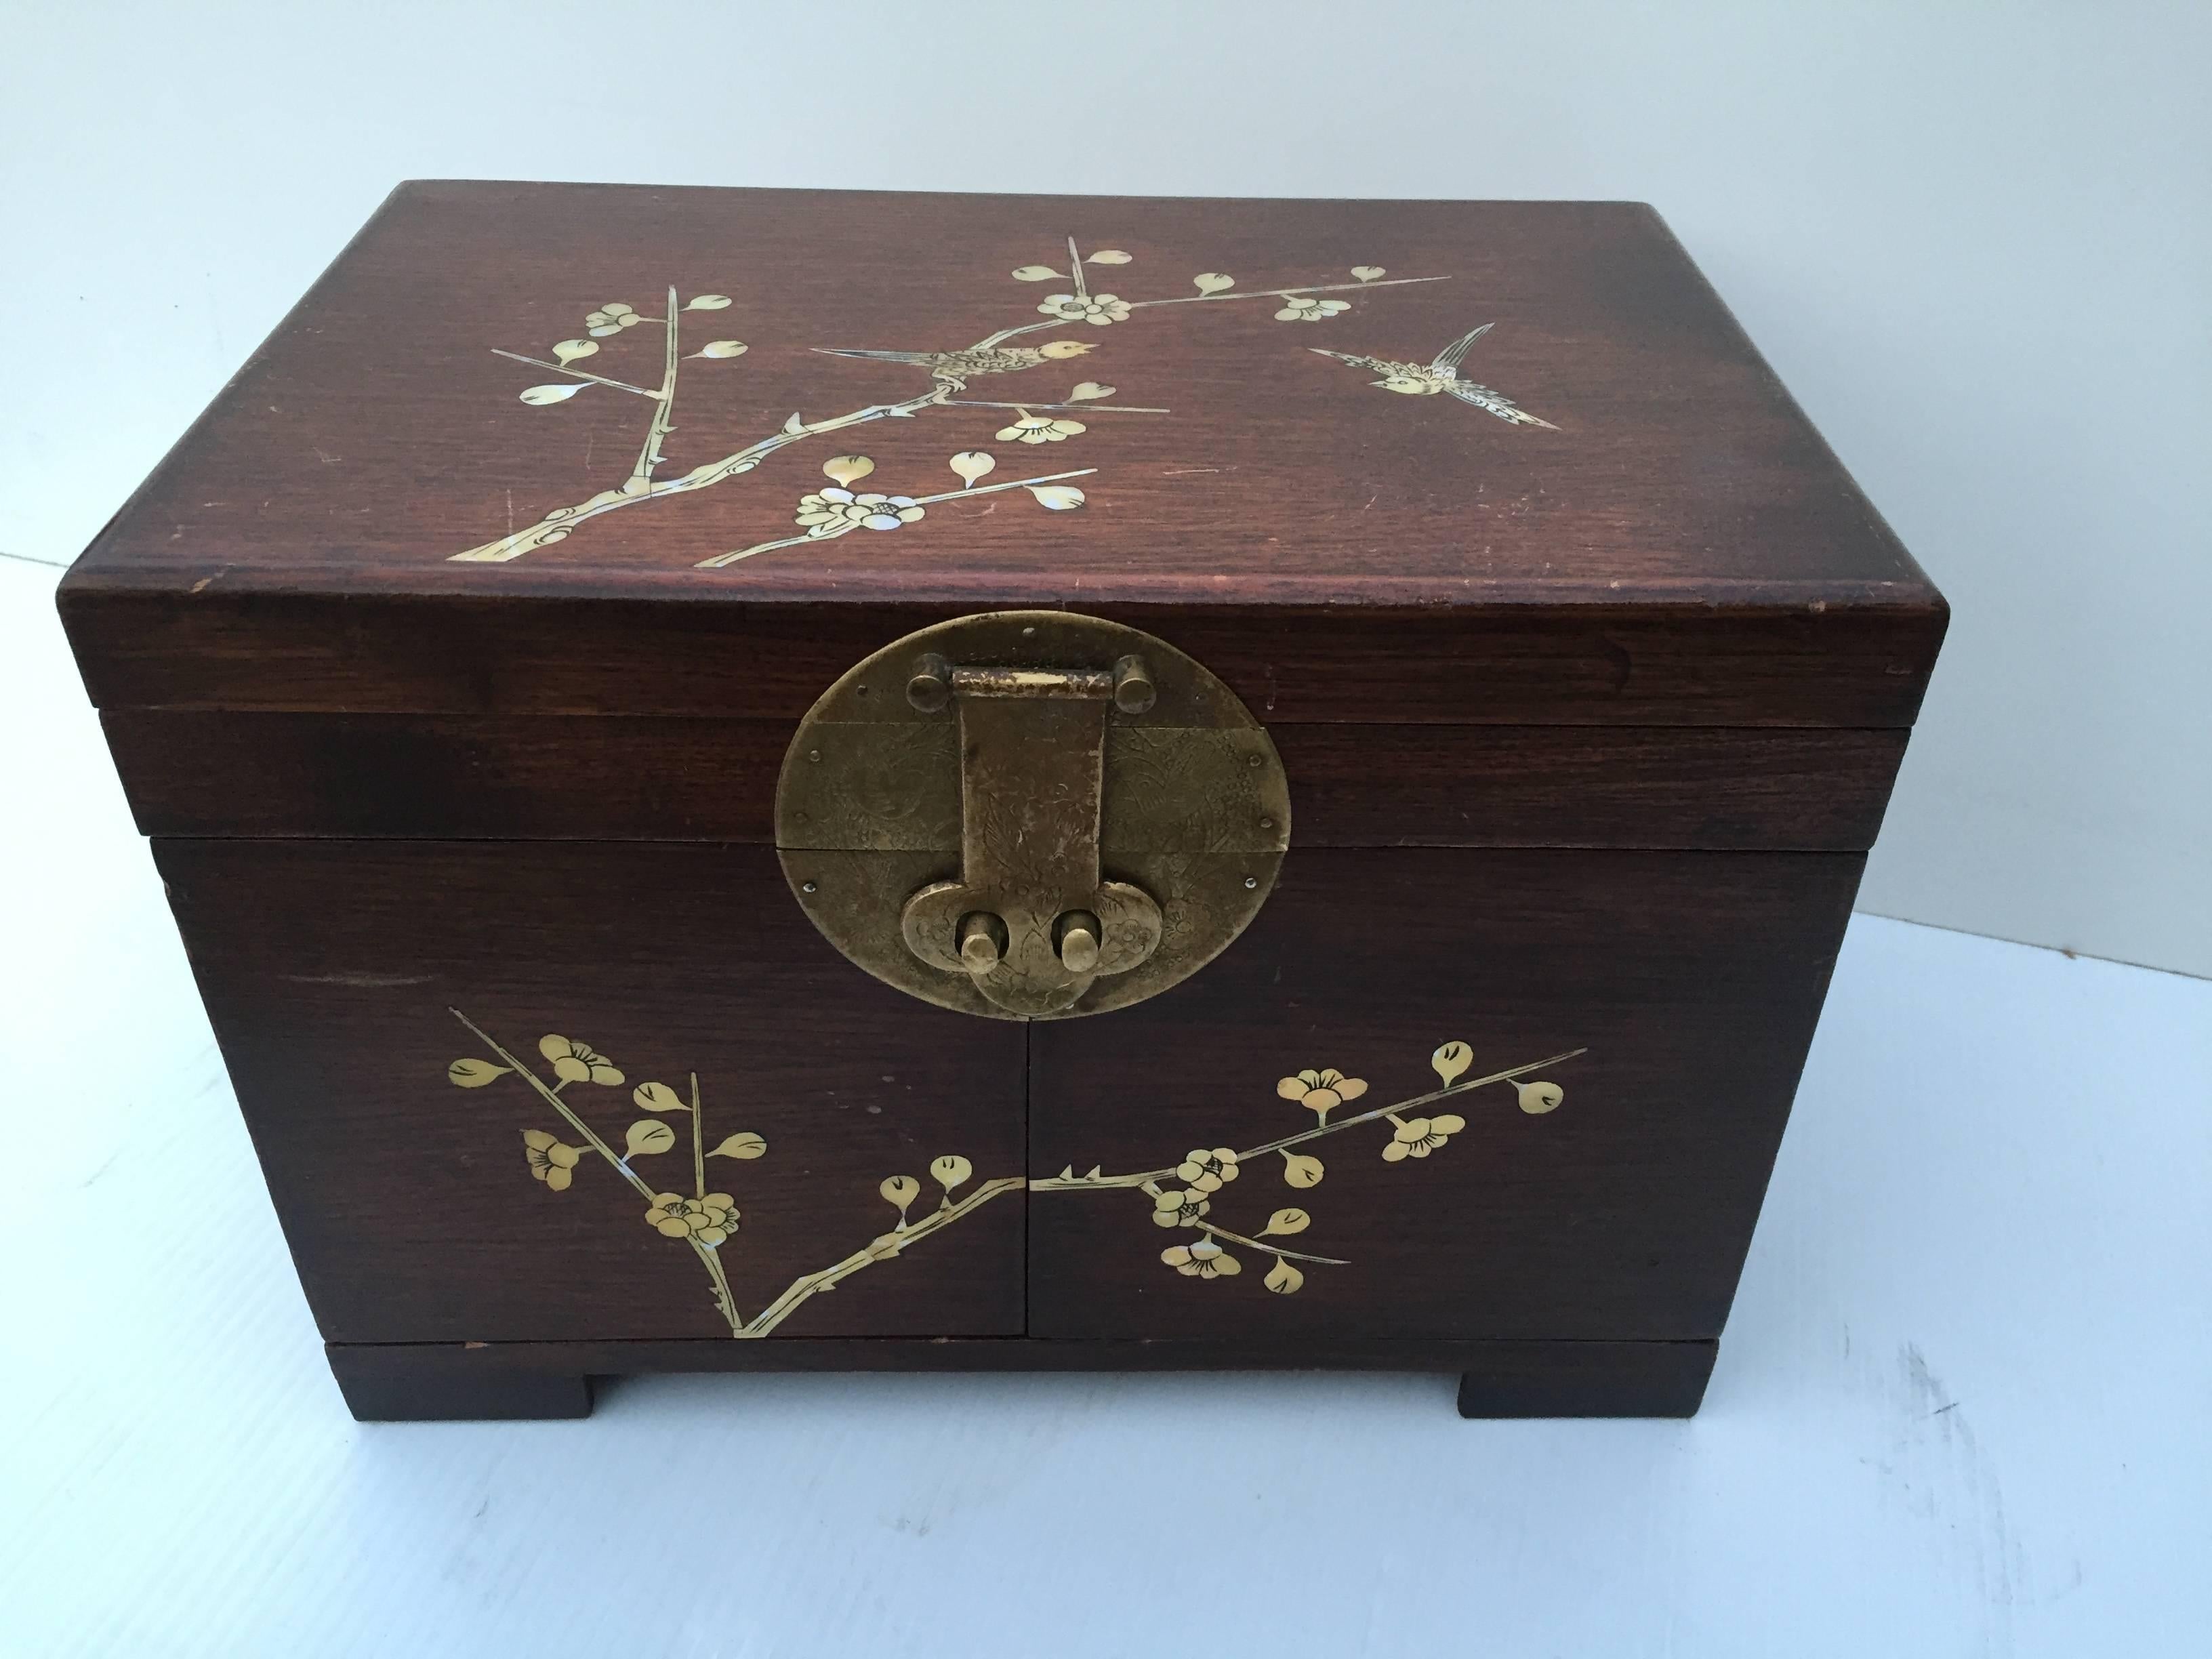 Beautiful jewelry box with inlaid mother-of-pearl motif and elegant Asian hardware, makes for an excellent gift for the holiday season, can be touched up upon request.